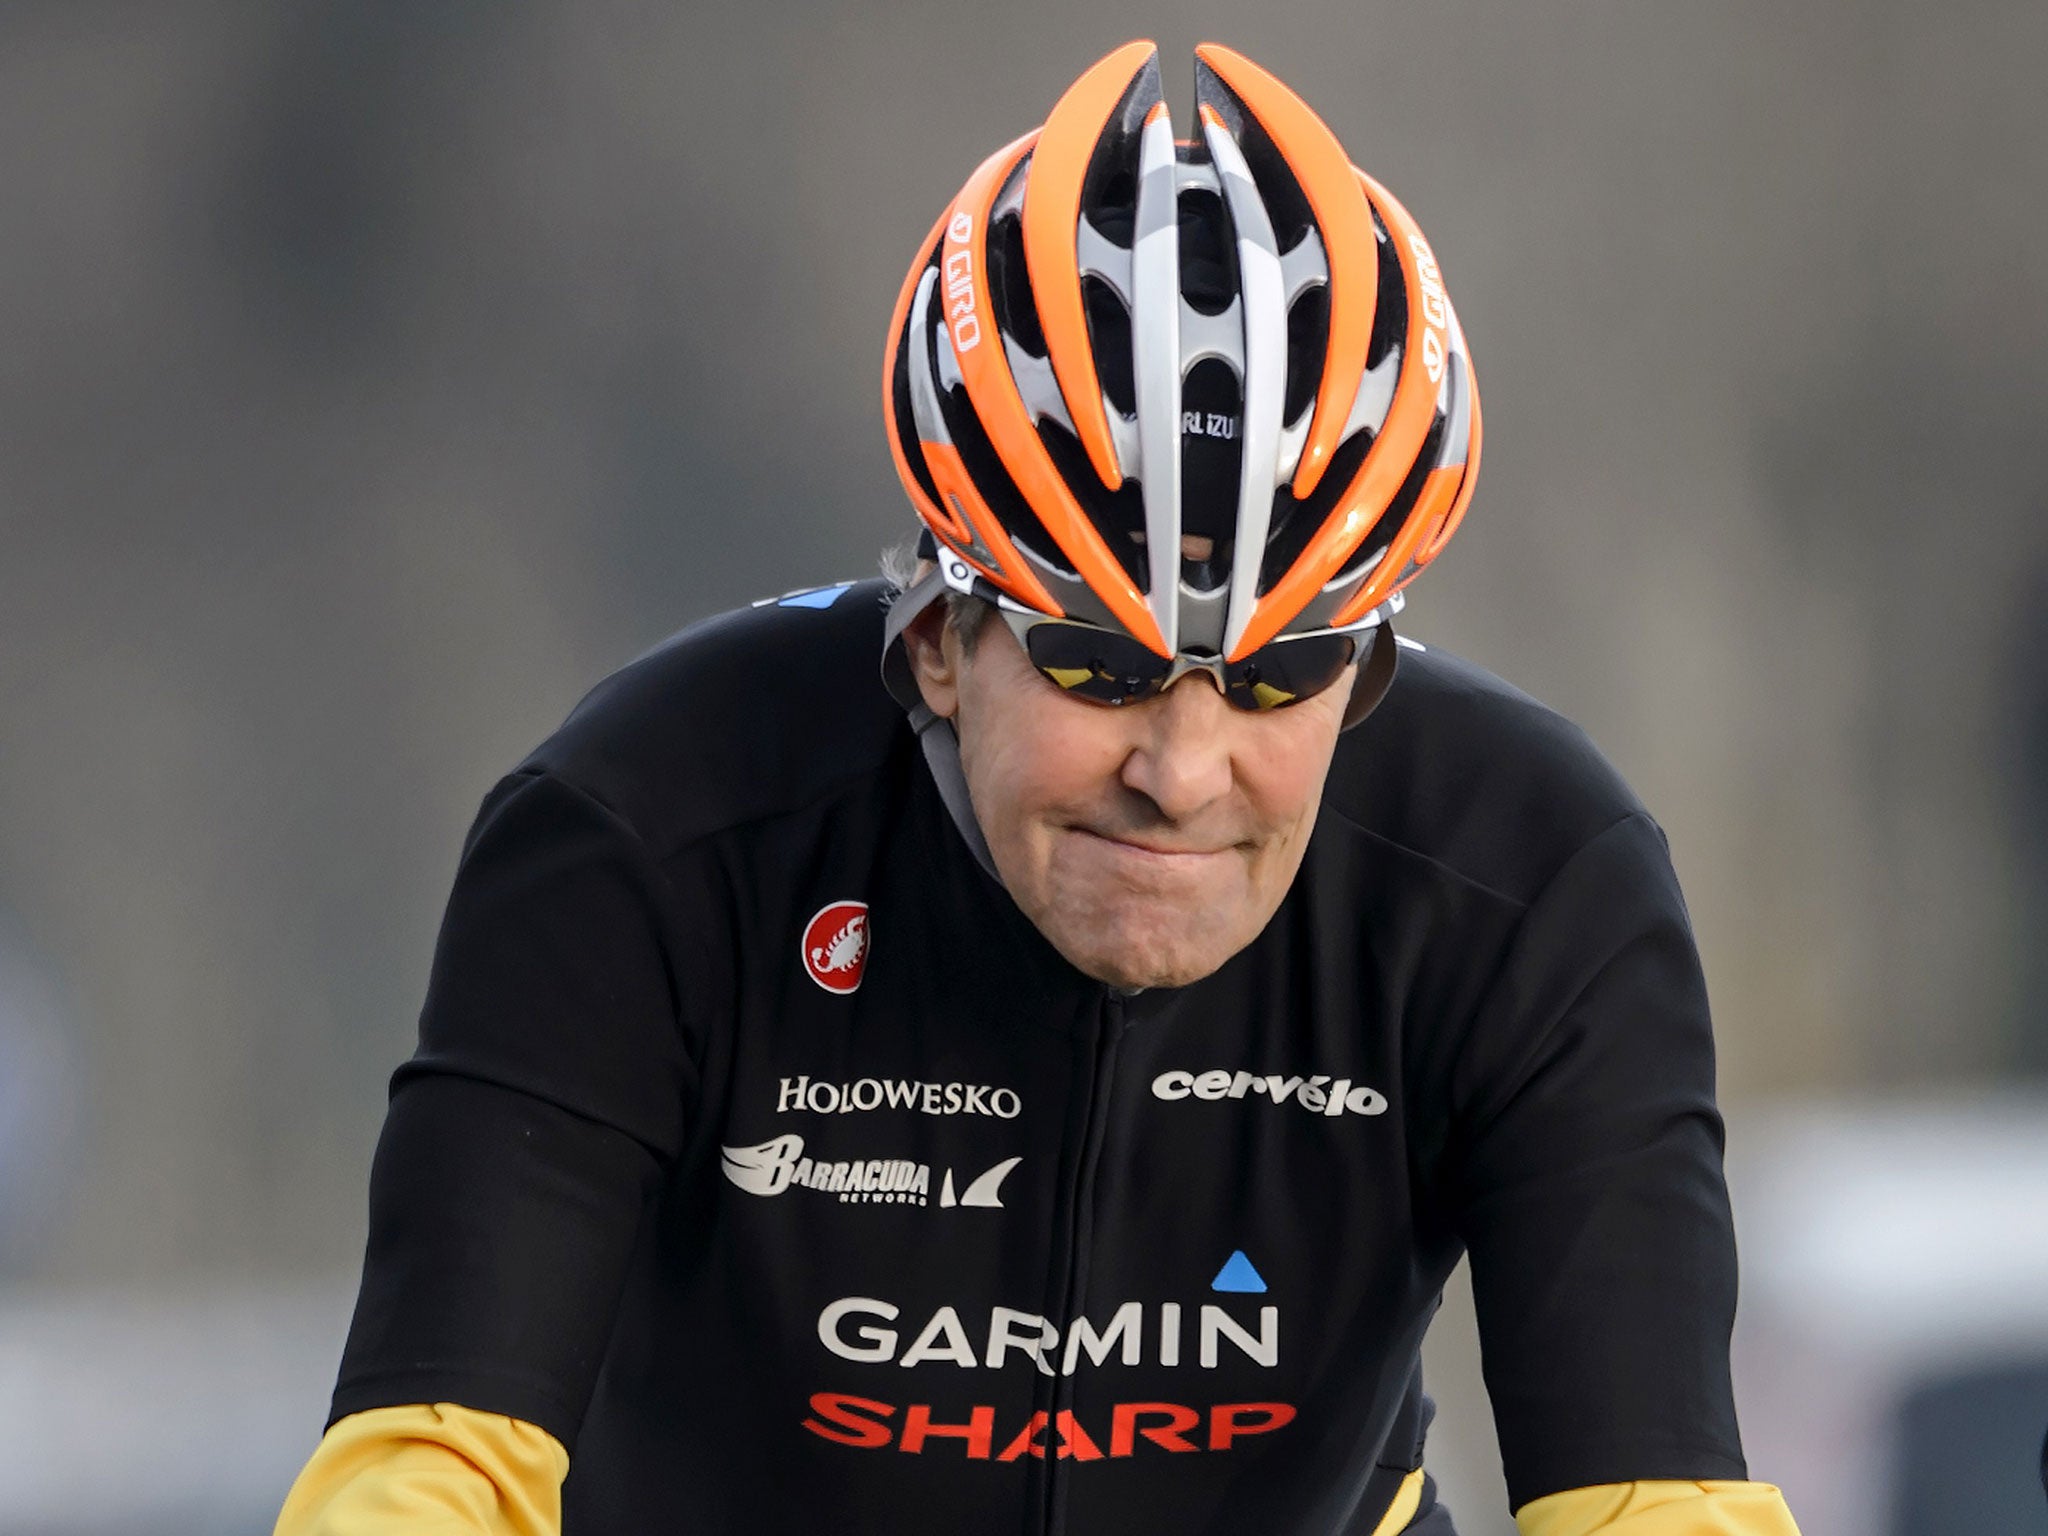 US Secretary of State John Kerry was setting out to ride a section of the Tour de France route